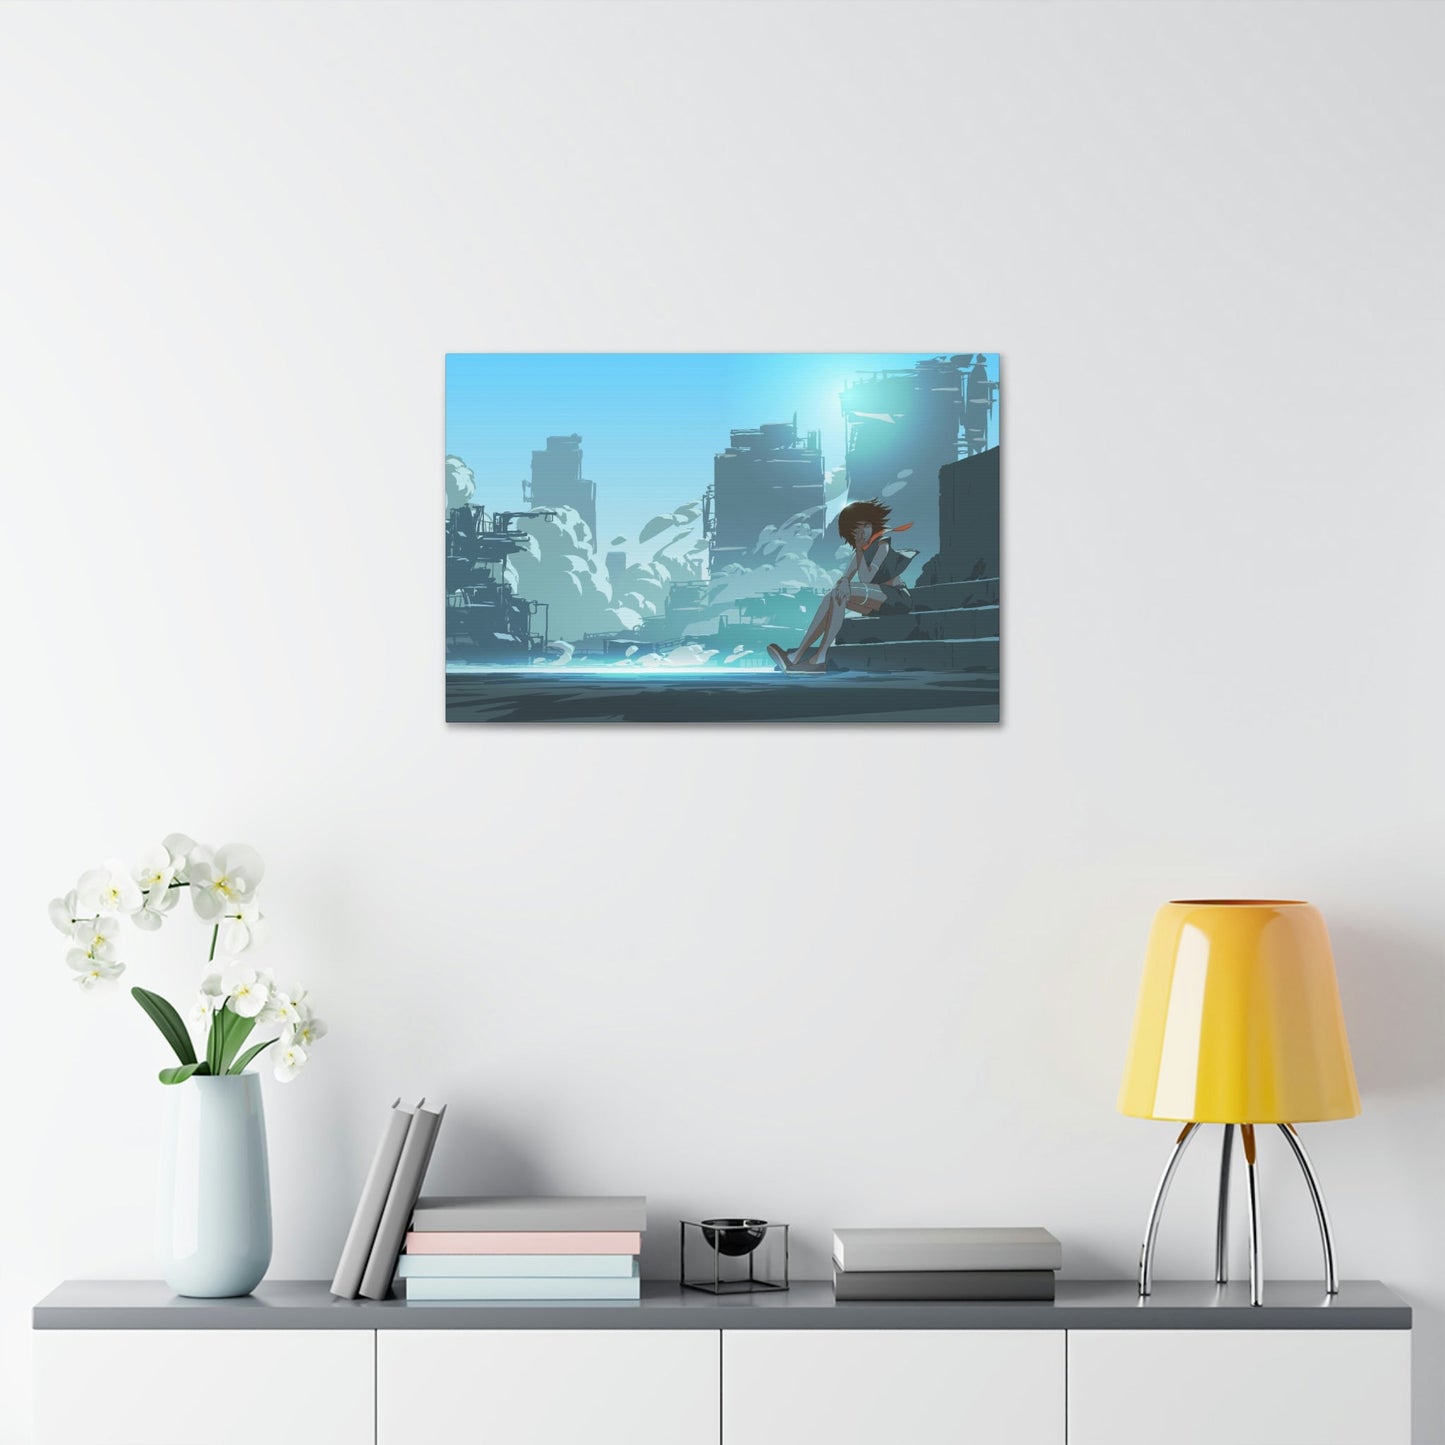 Anime Adventure: Framed Canvas Art Featuring Action-Packed Anime Scenes